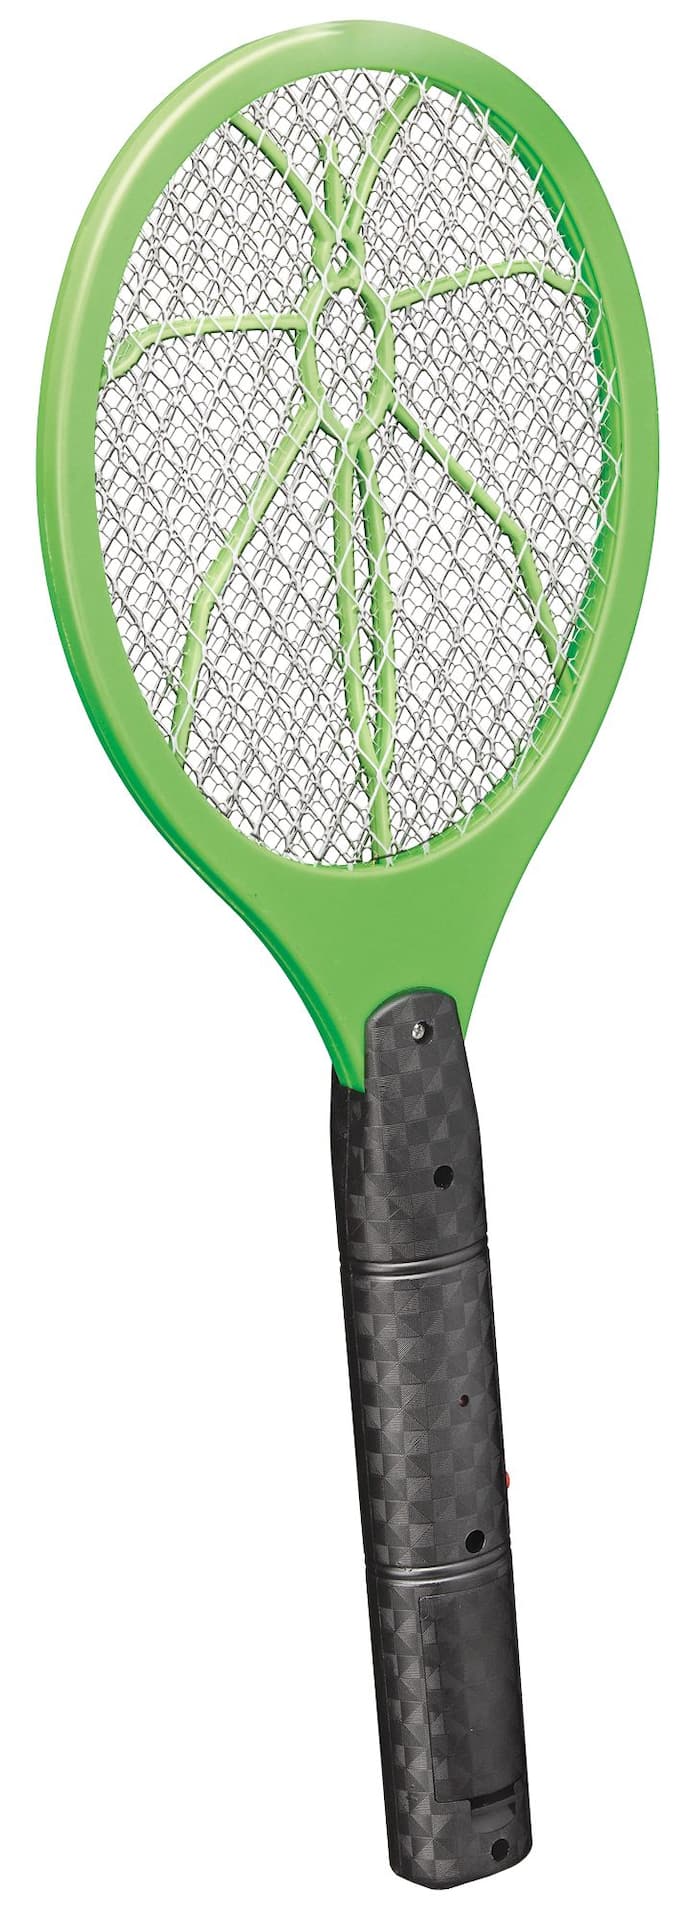 https://media-www.canadiantire.ca/product/seasonal-gardening/gardening/mosquito-sun-protection/0593954/bug-zapper-racket-no-batteries-caf90288-8b00-400c-9a8c-ff73f29d4bf4-jpgrendition.jpg